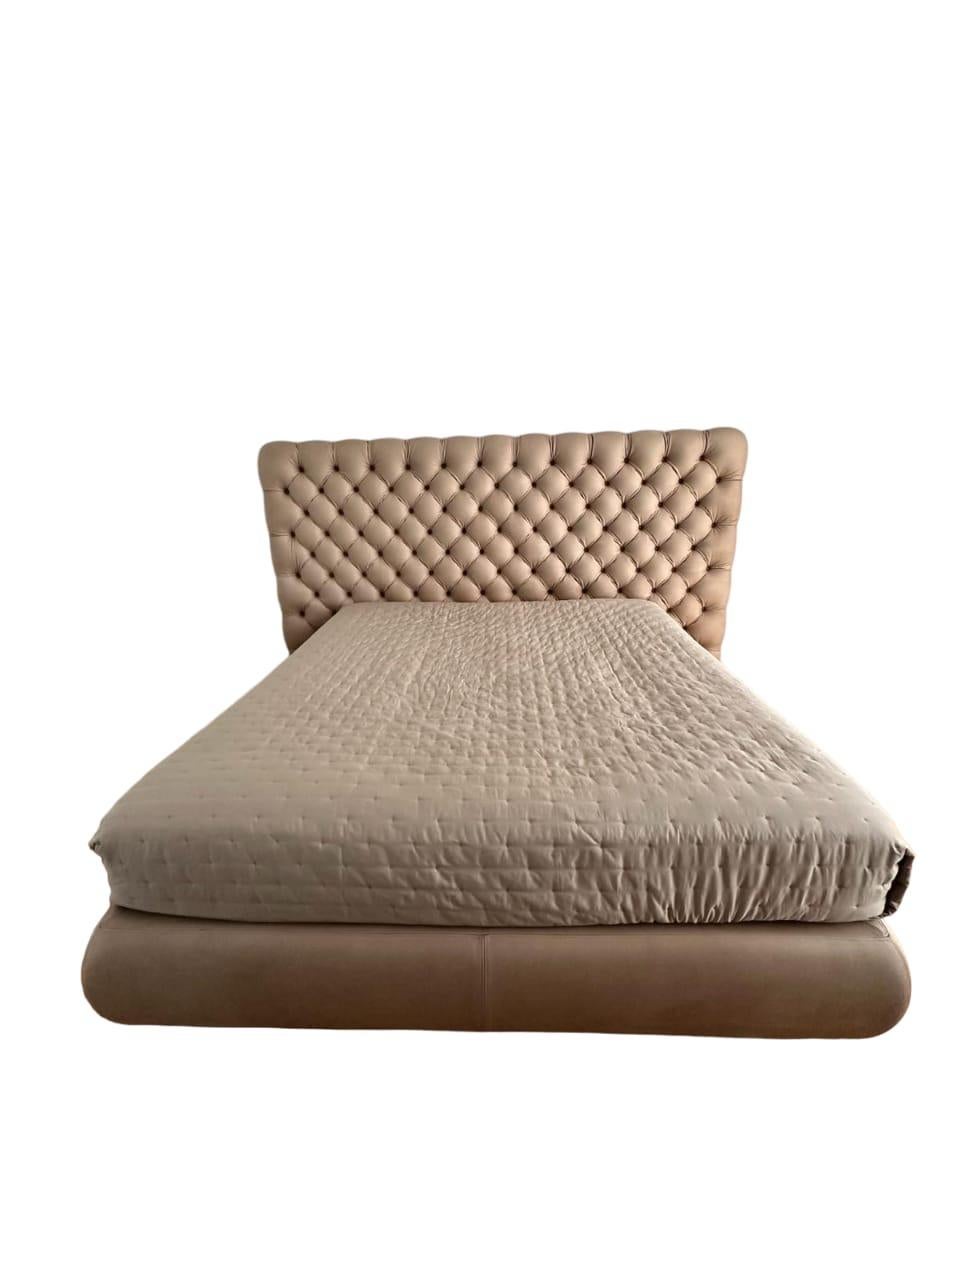 BAXTER HEAVEN LEATHER BED BY  PAOLA NAVONE. 
YEAR: 2010
CATEGORY: BED/BED FRAME. 
Bedspring: Width: 190 x 210 cm; 
Length:180 x 200 cm; Height: 32 cm. 
Headboard: Width 268; Height: 13 cm; 
Length: 152 cm. 